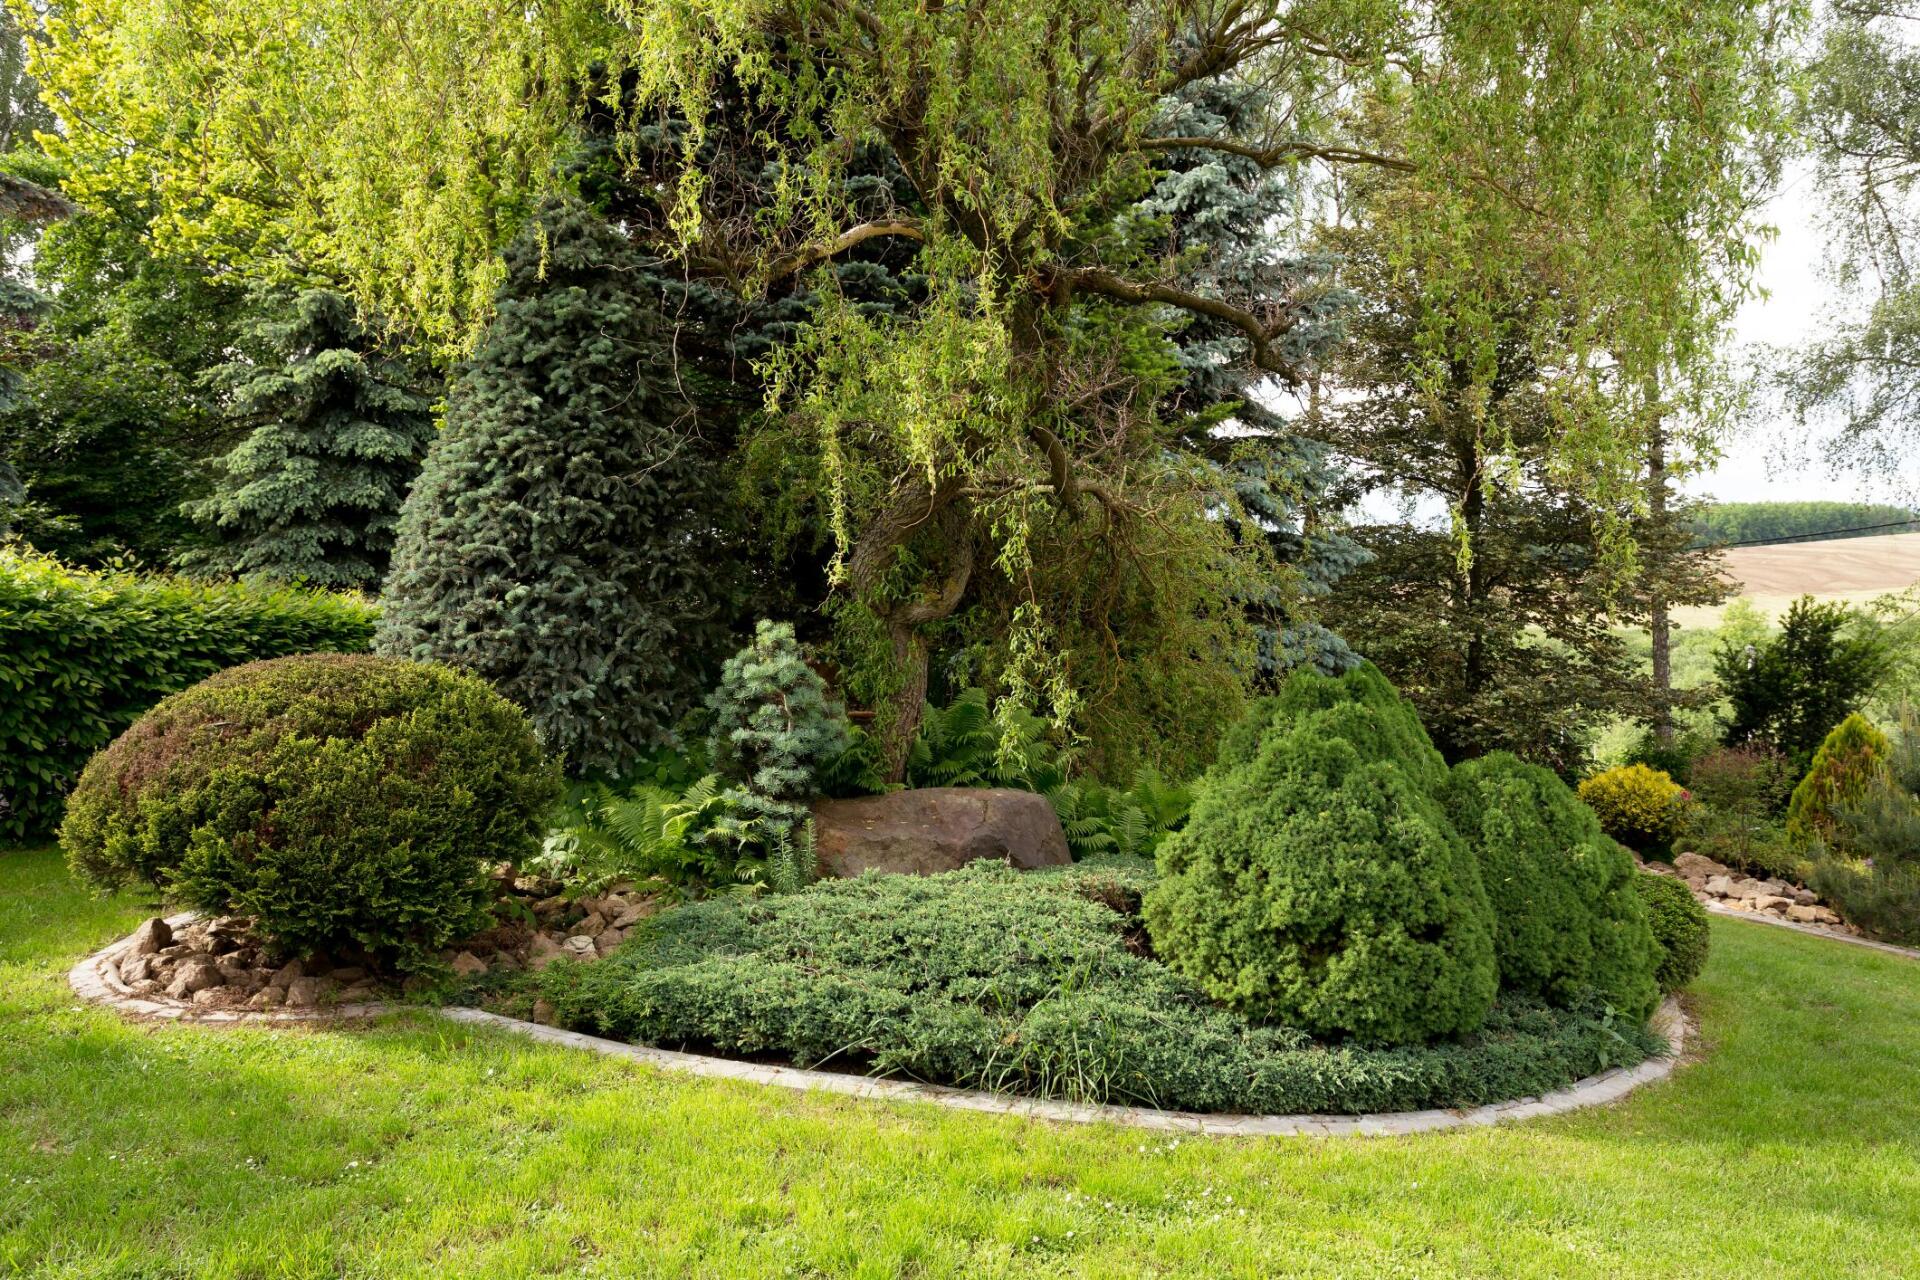 green bushes and shrubs